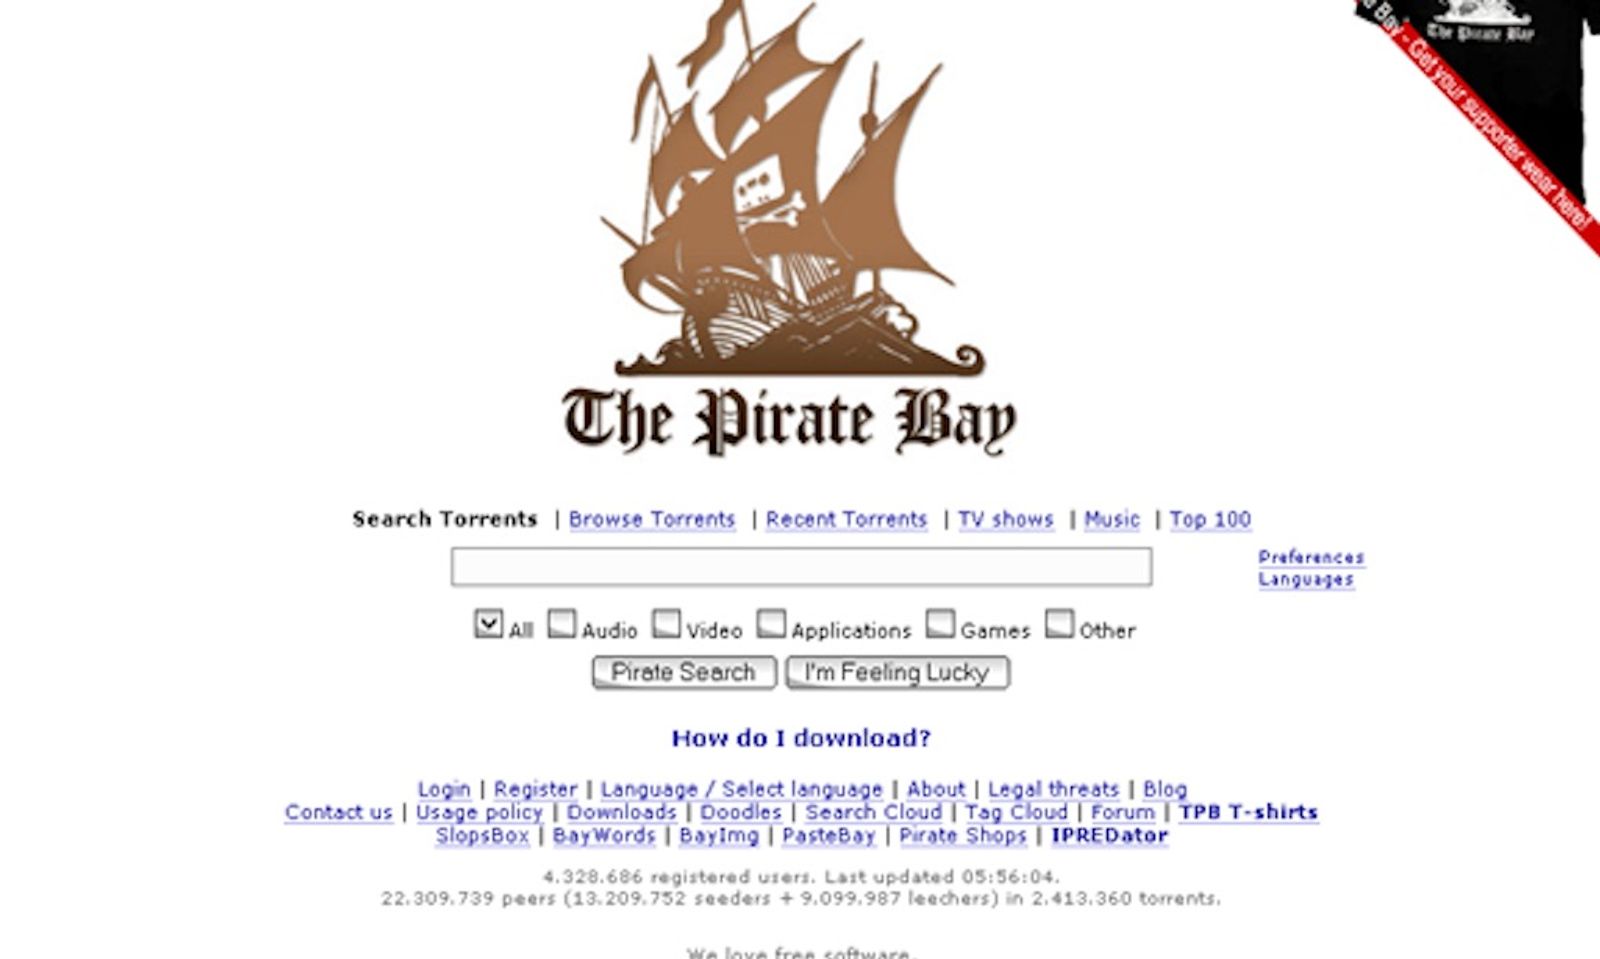 Canada Turns Back Industry Push to Block Online ‘Piracy’ Sites